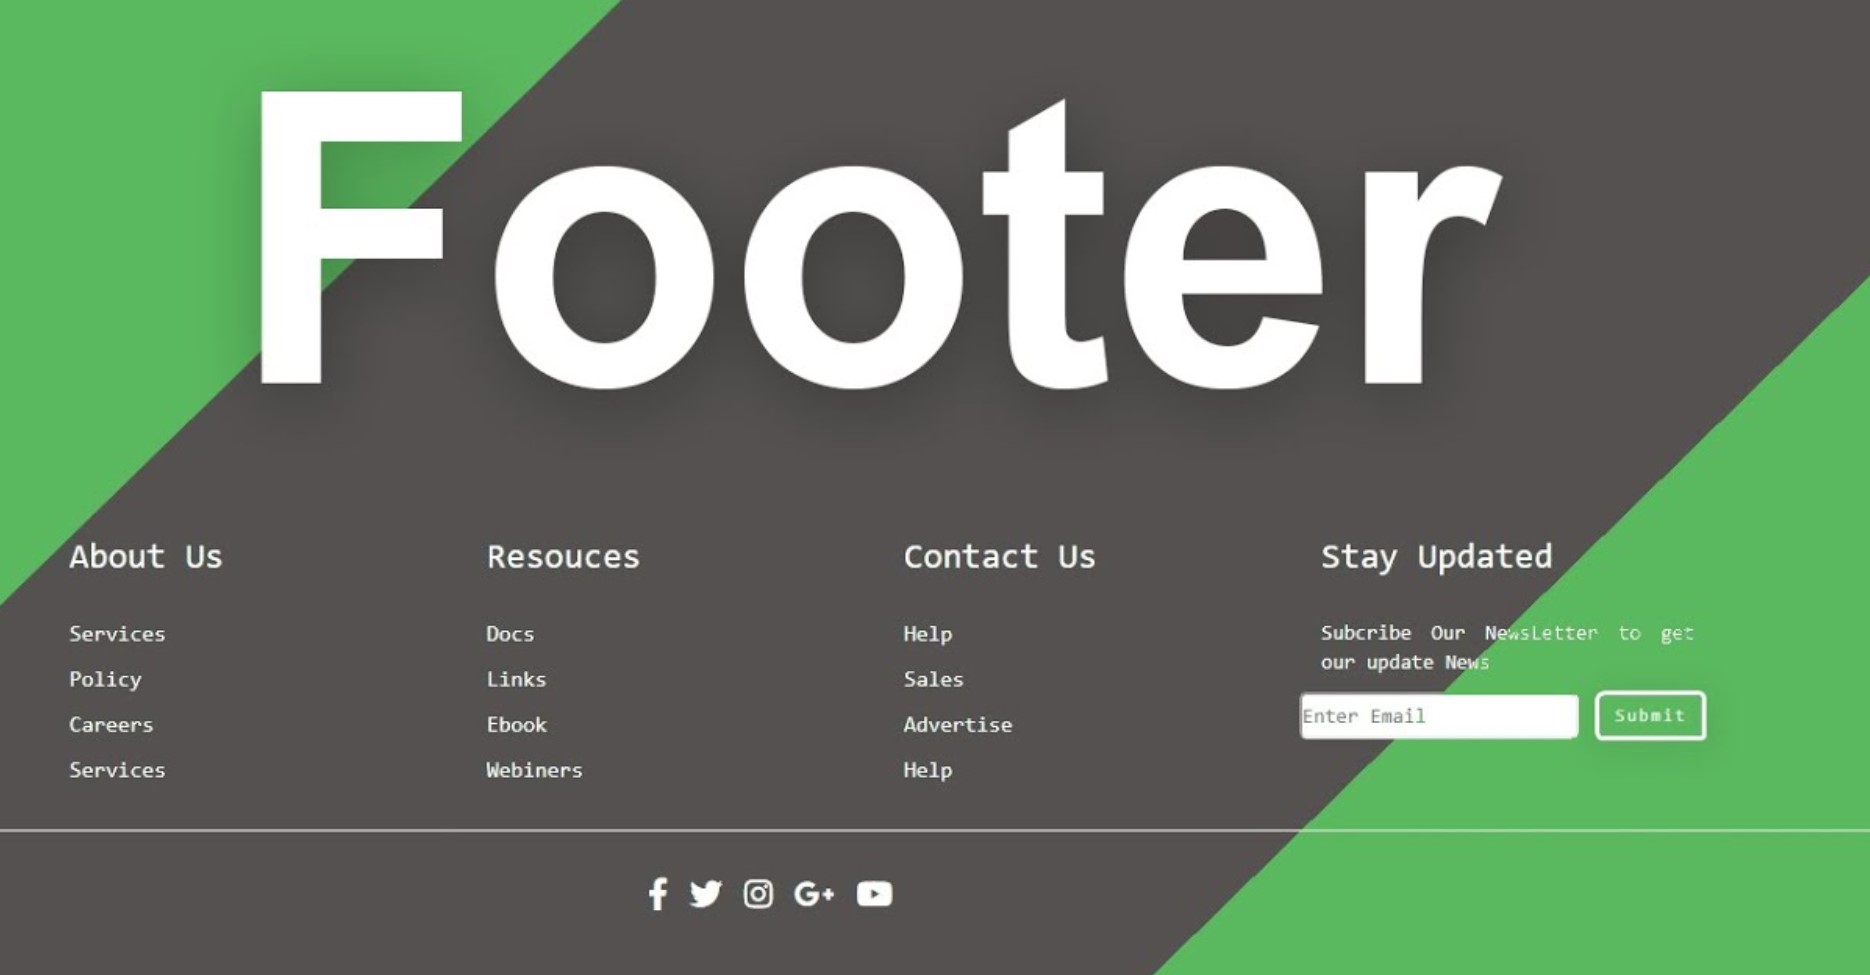 Tips for Designing an Effective Website Footer